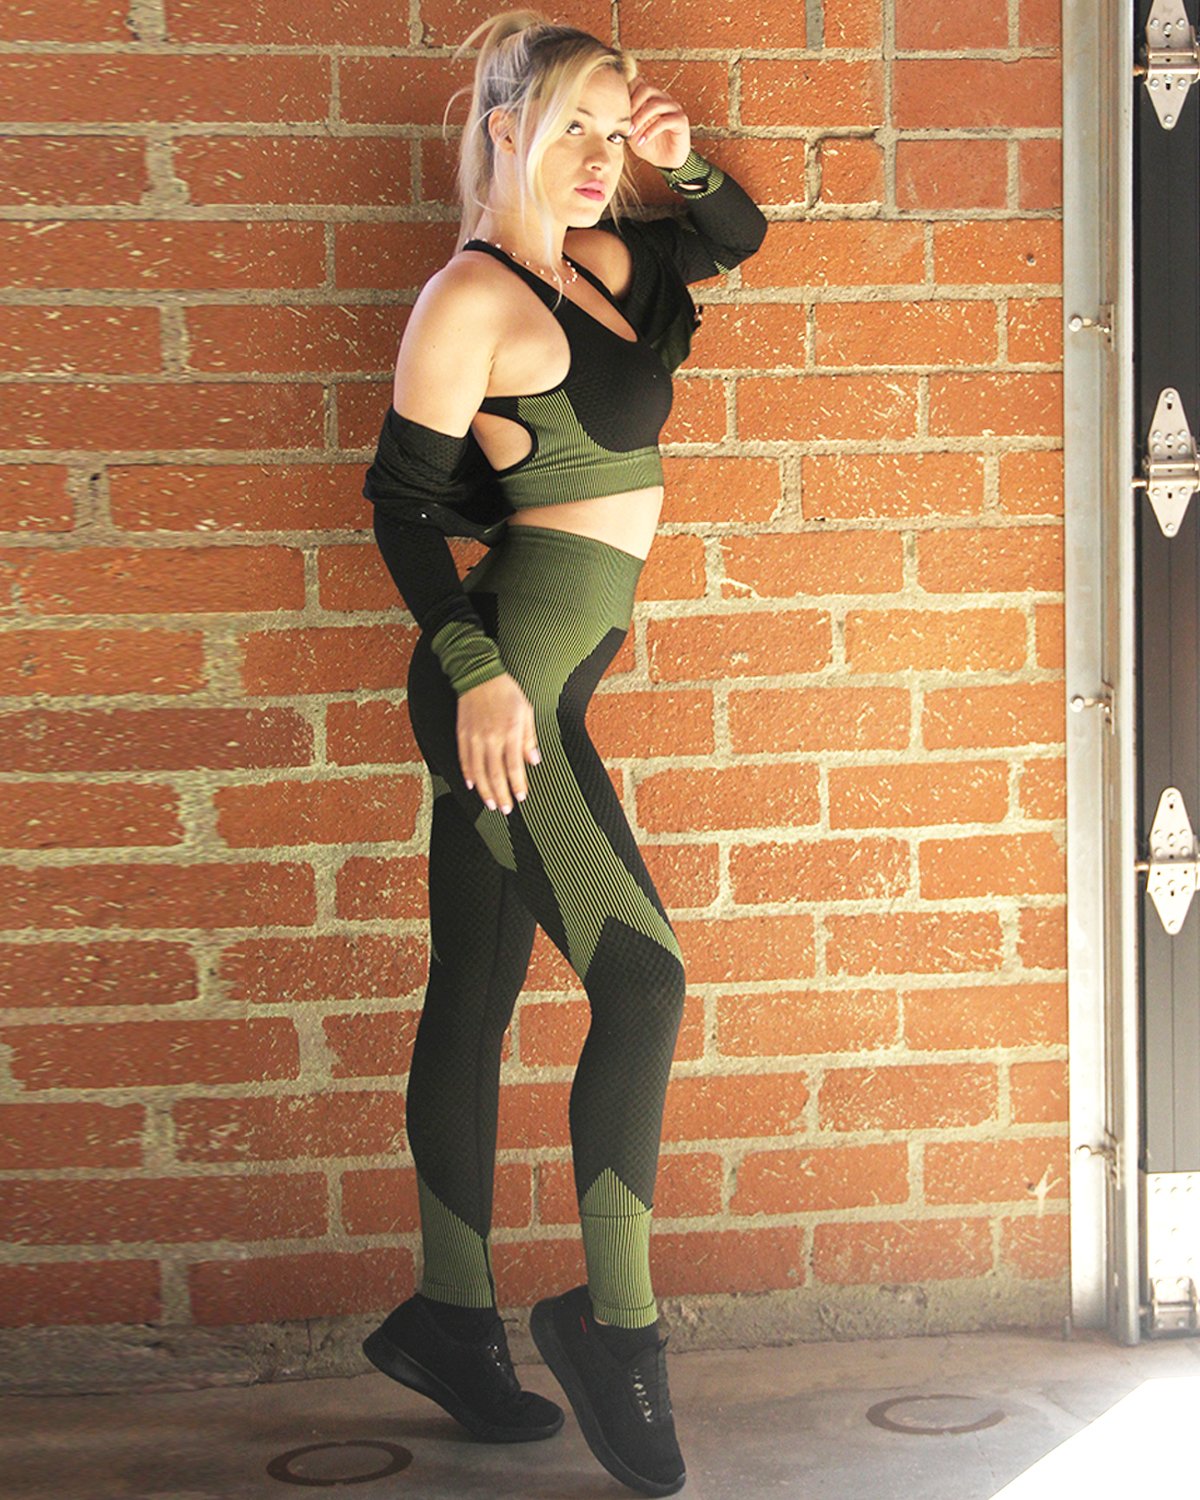 Seamless Leggings & Sports Top 2 Set - Black With Green - Women's Activewear Set from fluentclothing.com